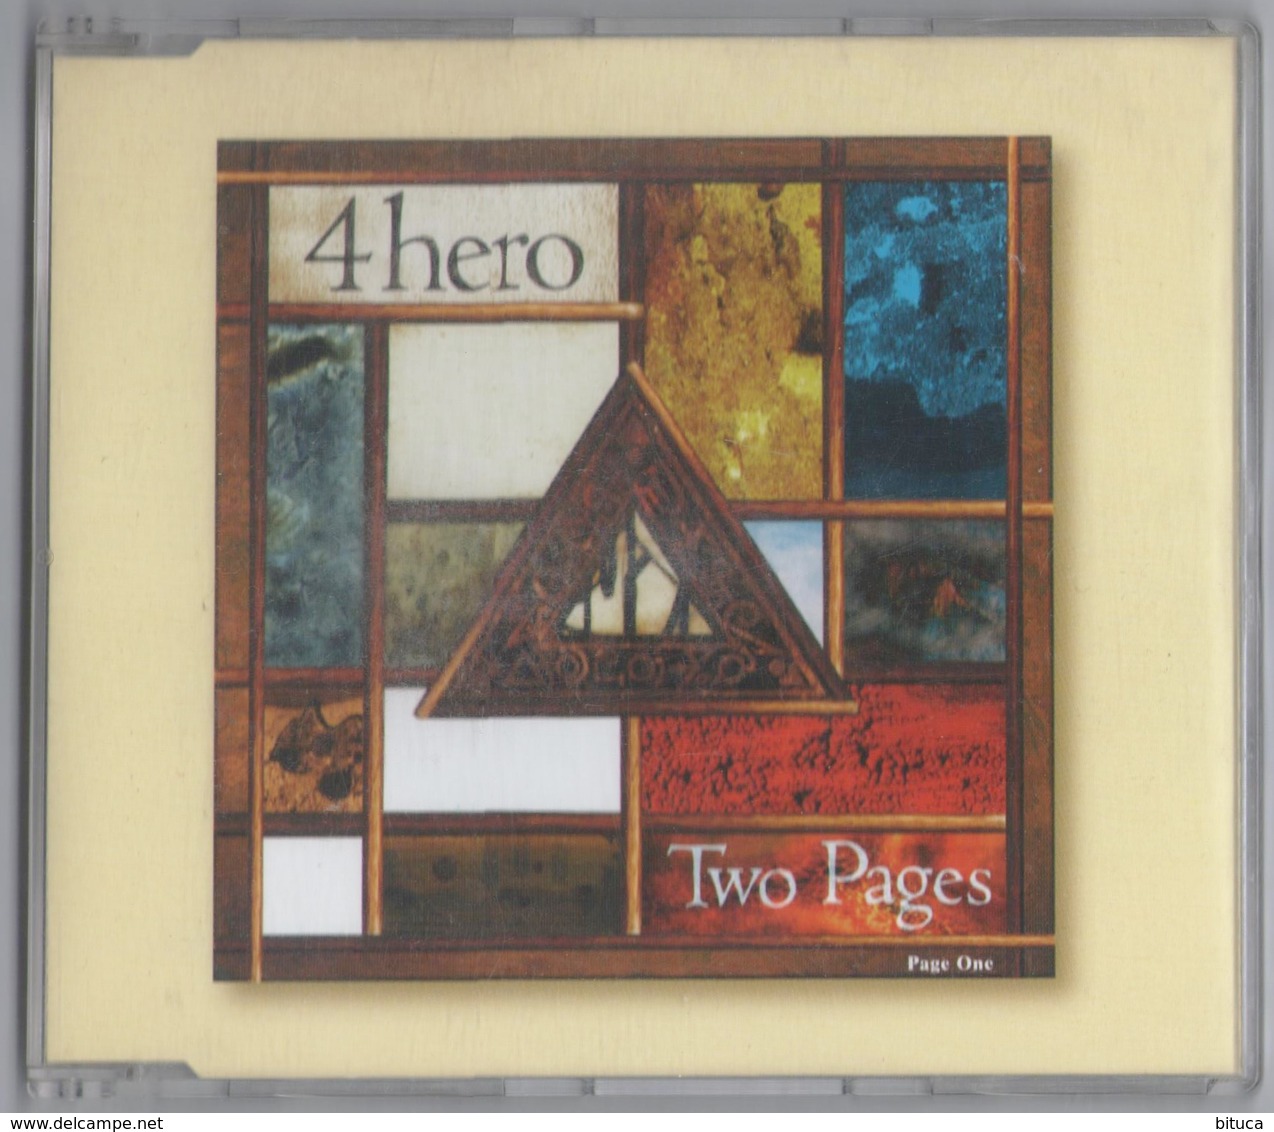 CD 11 TITRES COLLECTOR 4 HERO TWO PAGES PAGE ONE BON ETAT & RARE - Dance, Techno & House